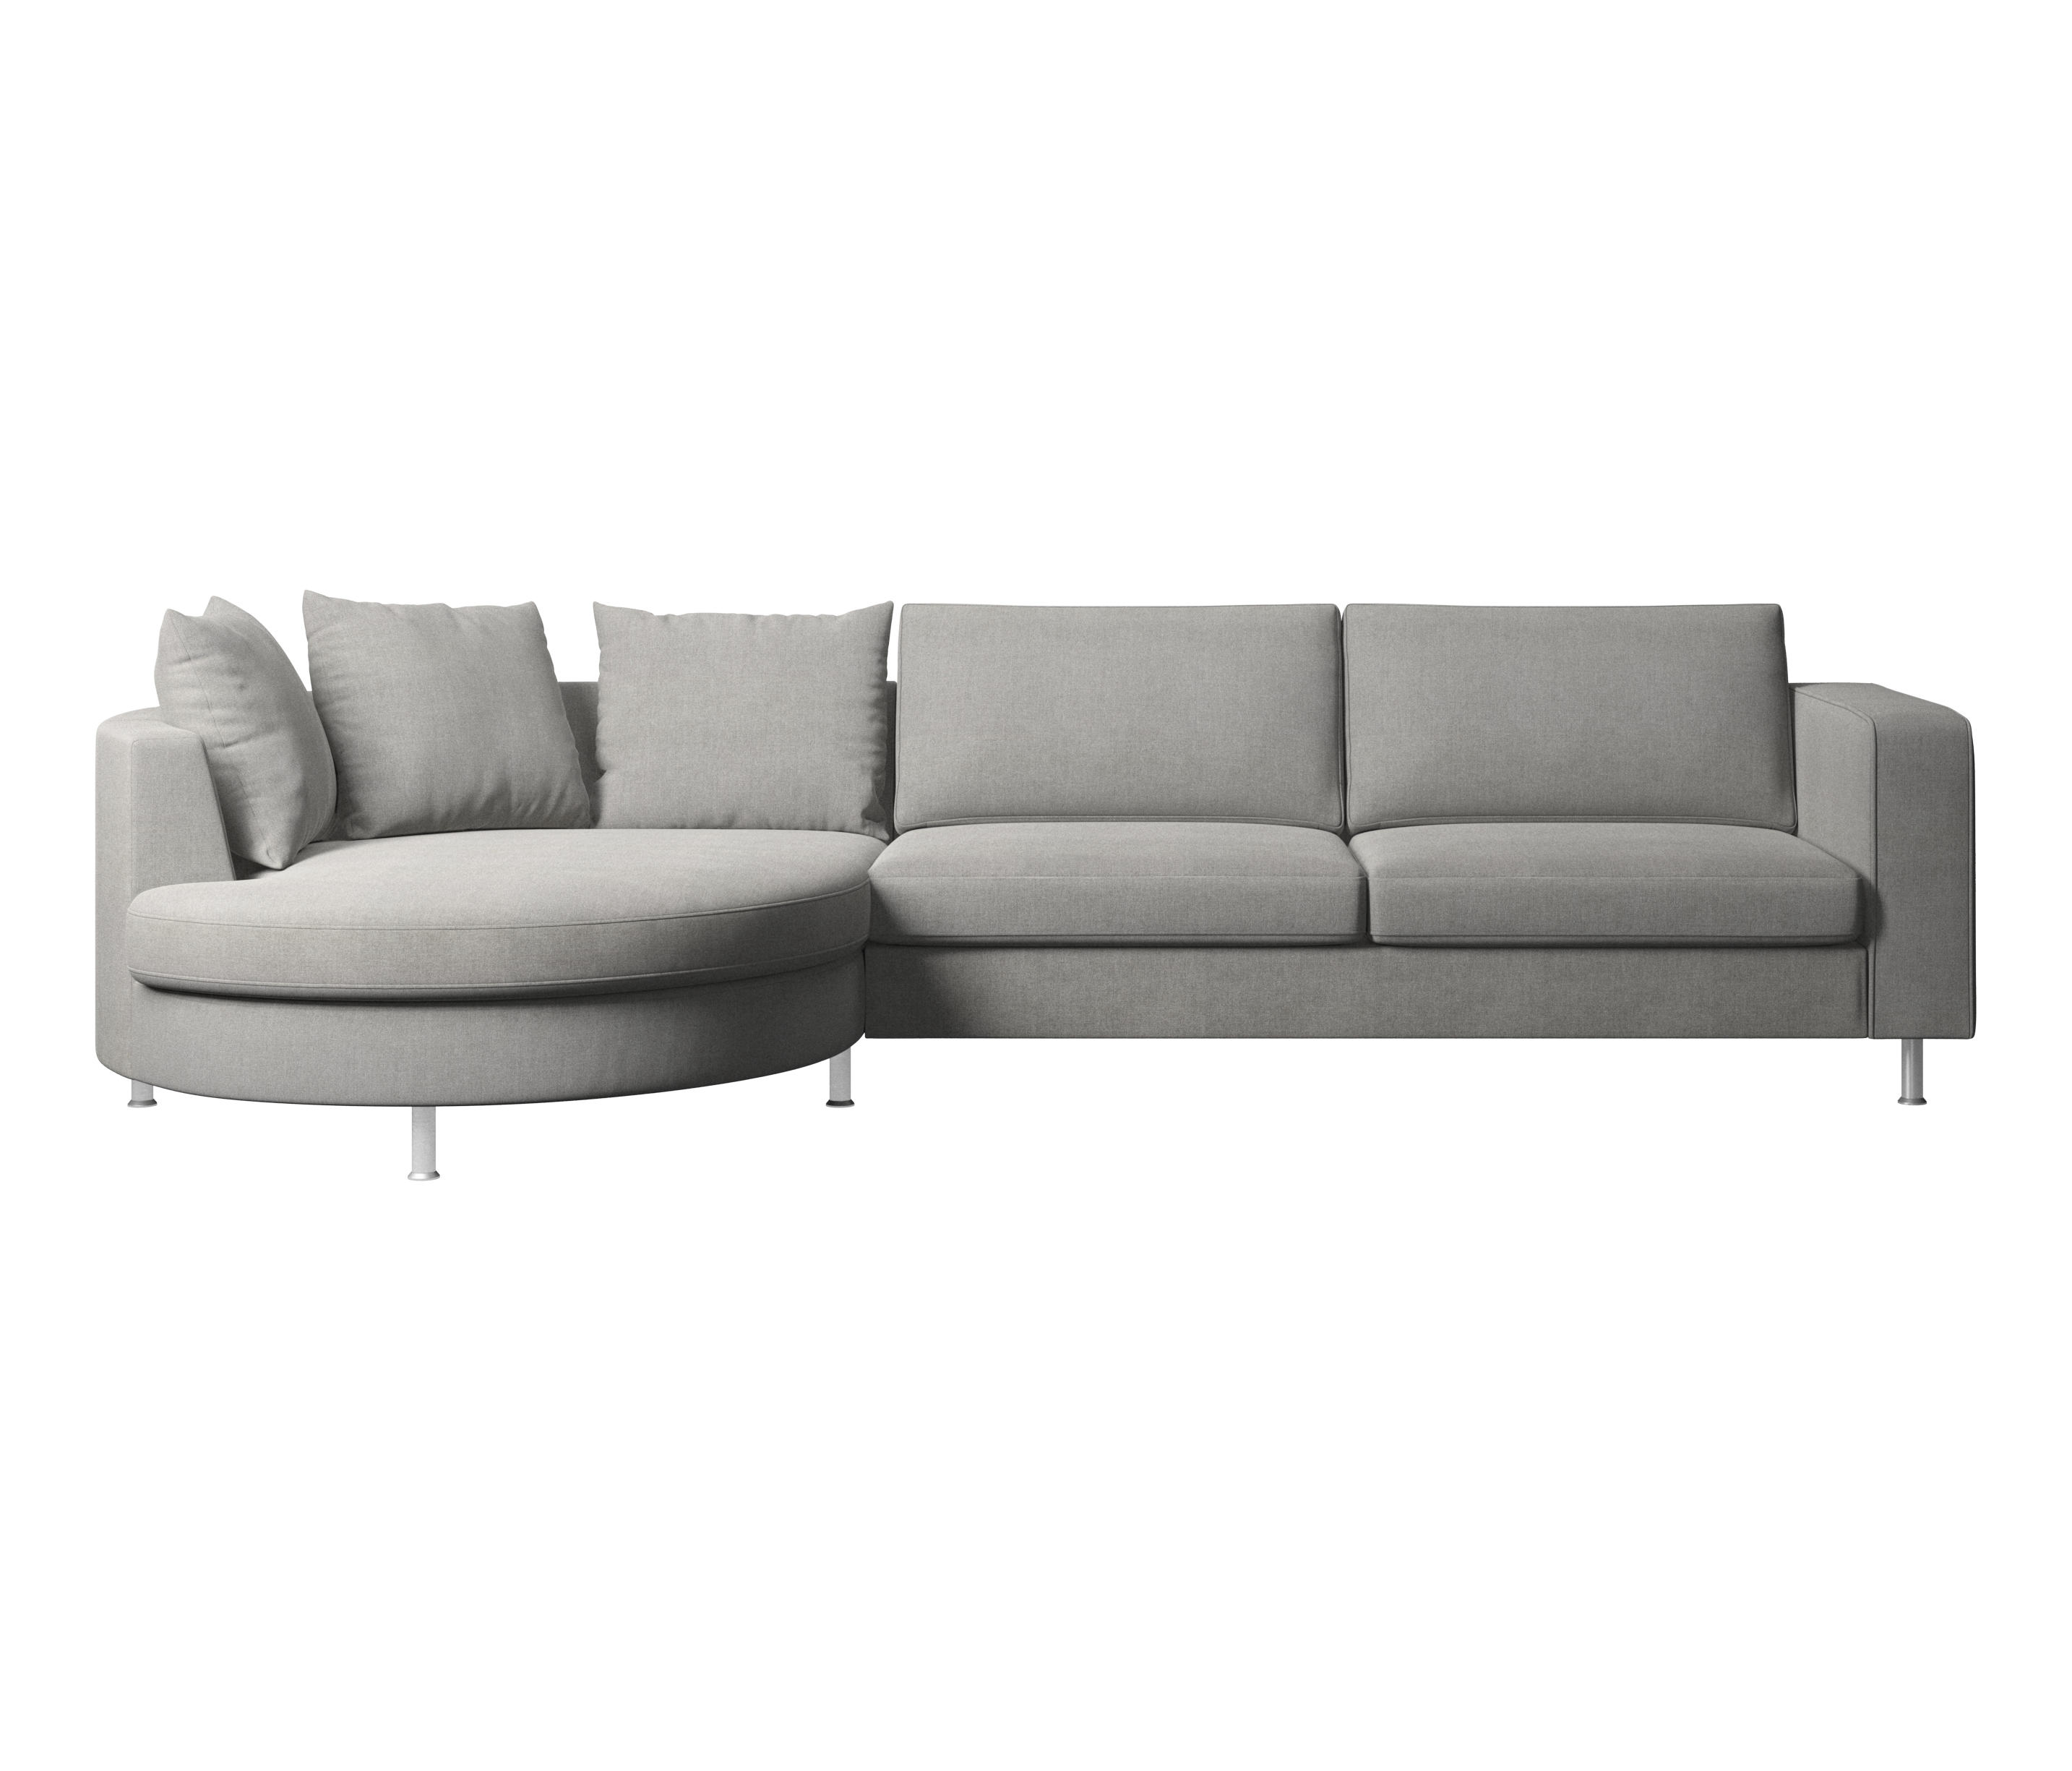 INDIVI ROUND - Sofas from BoConcept | Architonic